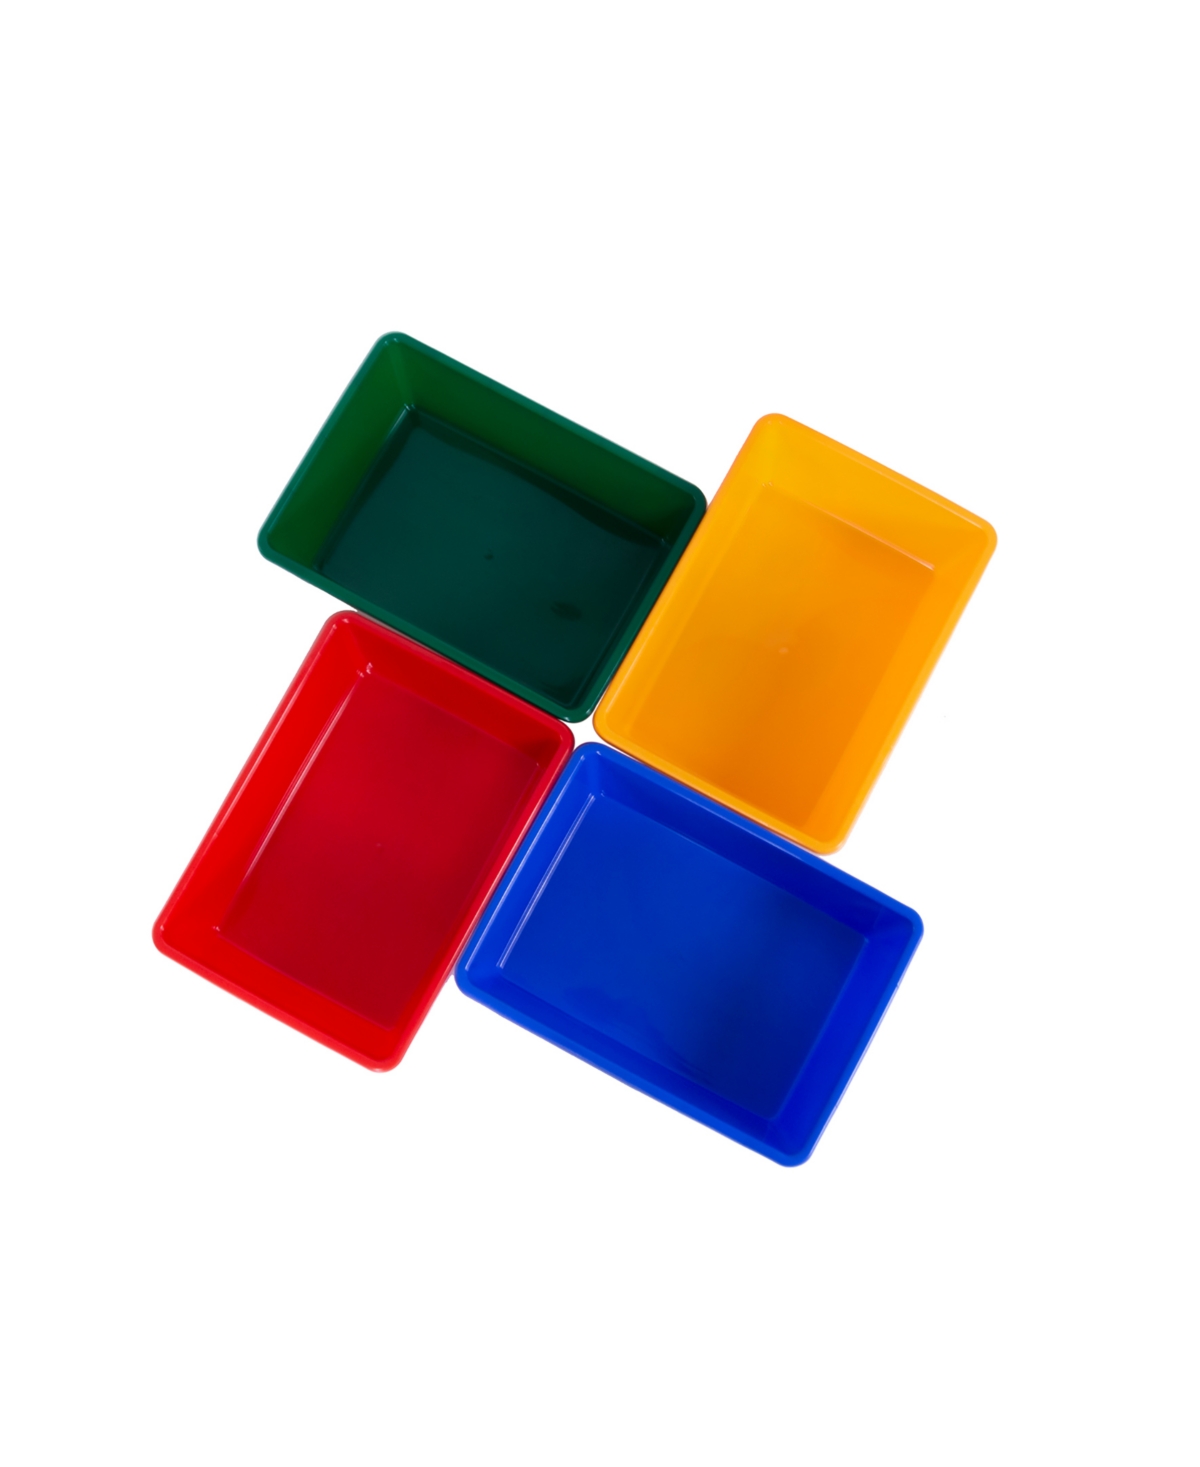 Toy Organizer Bins, Pack of 4 - Primary Red, Yellow, Blue, Green